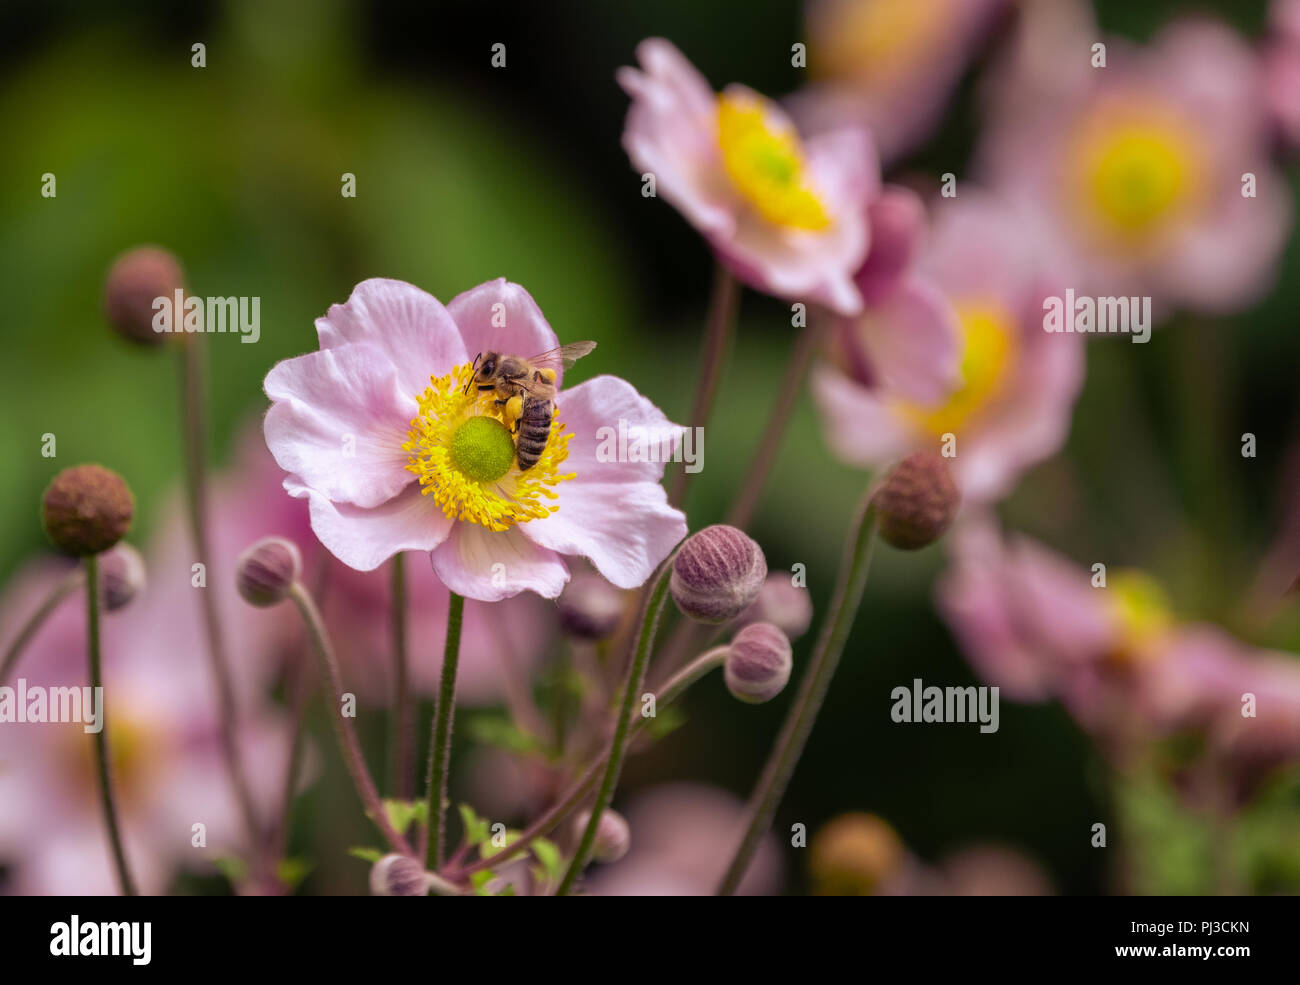 Warm color outdoor floral image of a blooming pink autumn anemone blossom,buds,bee,hot sunny summer day,natural blurred background Stock Photo